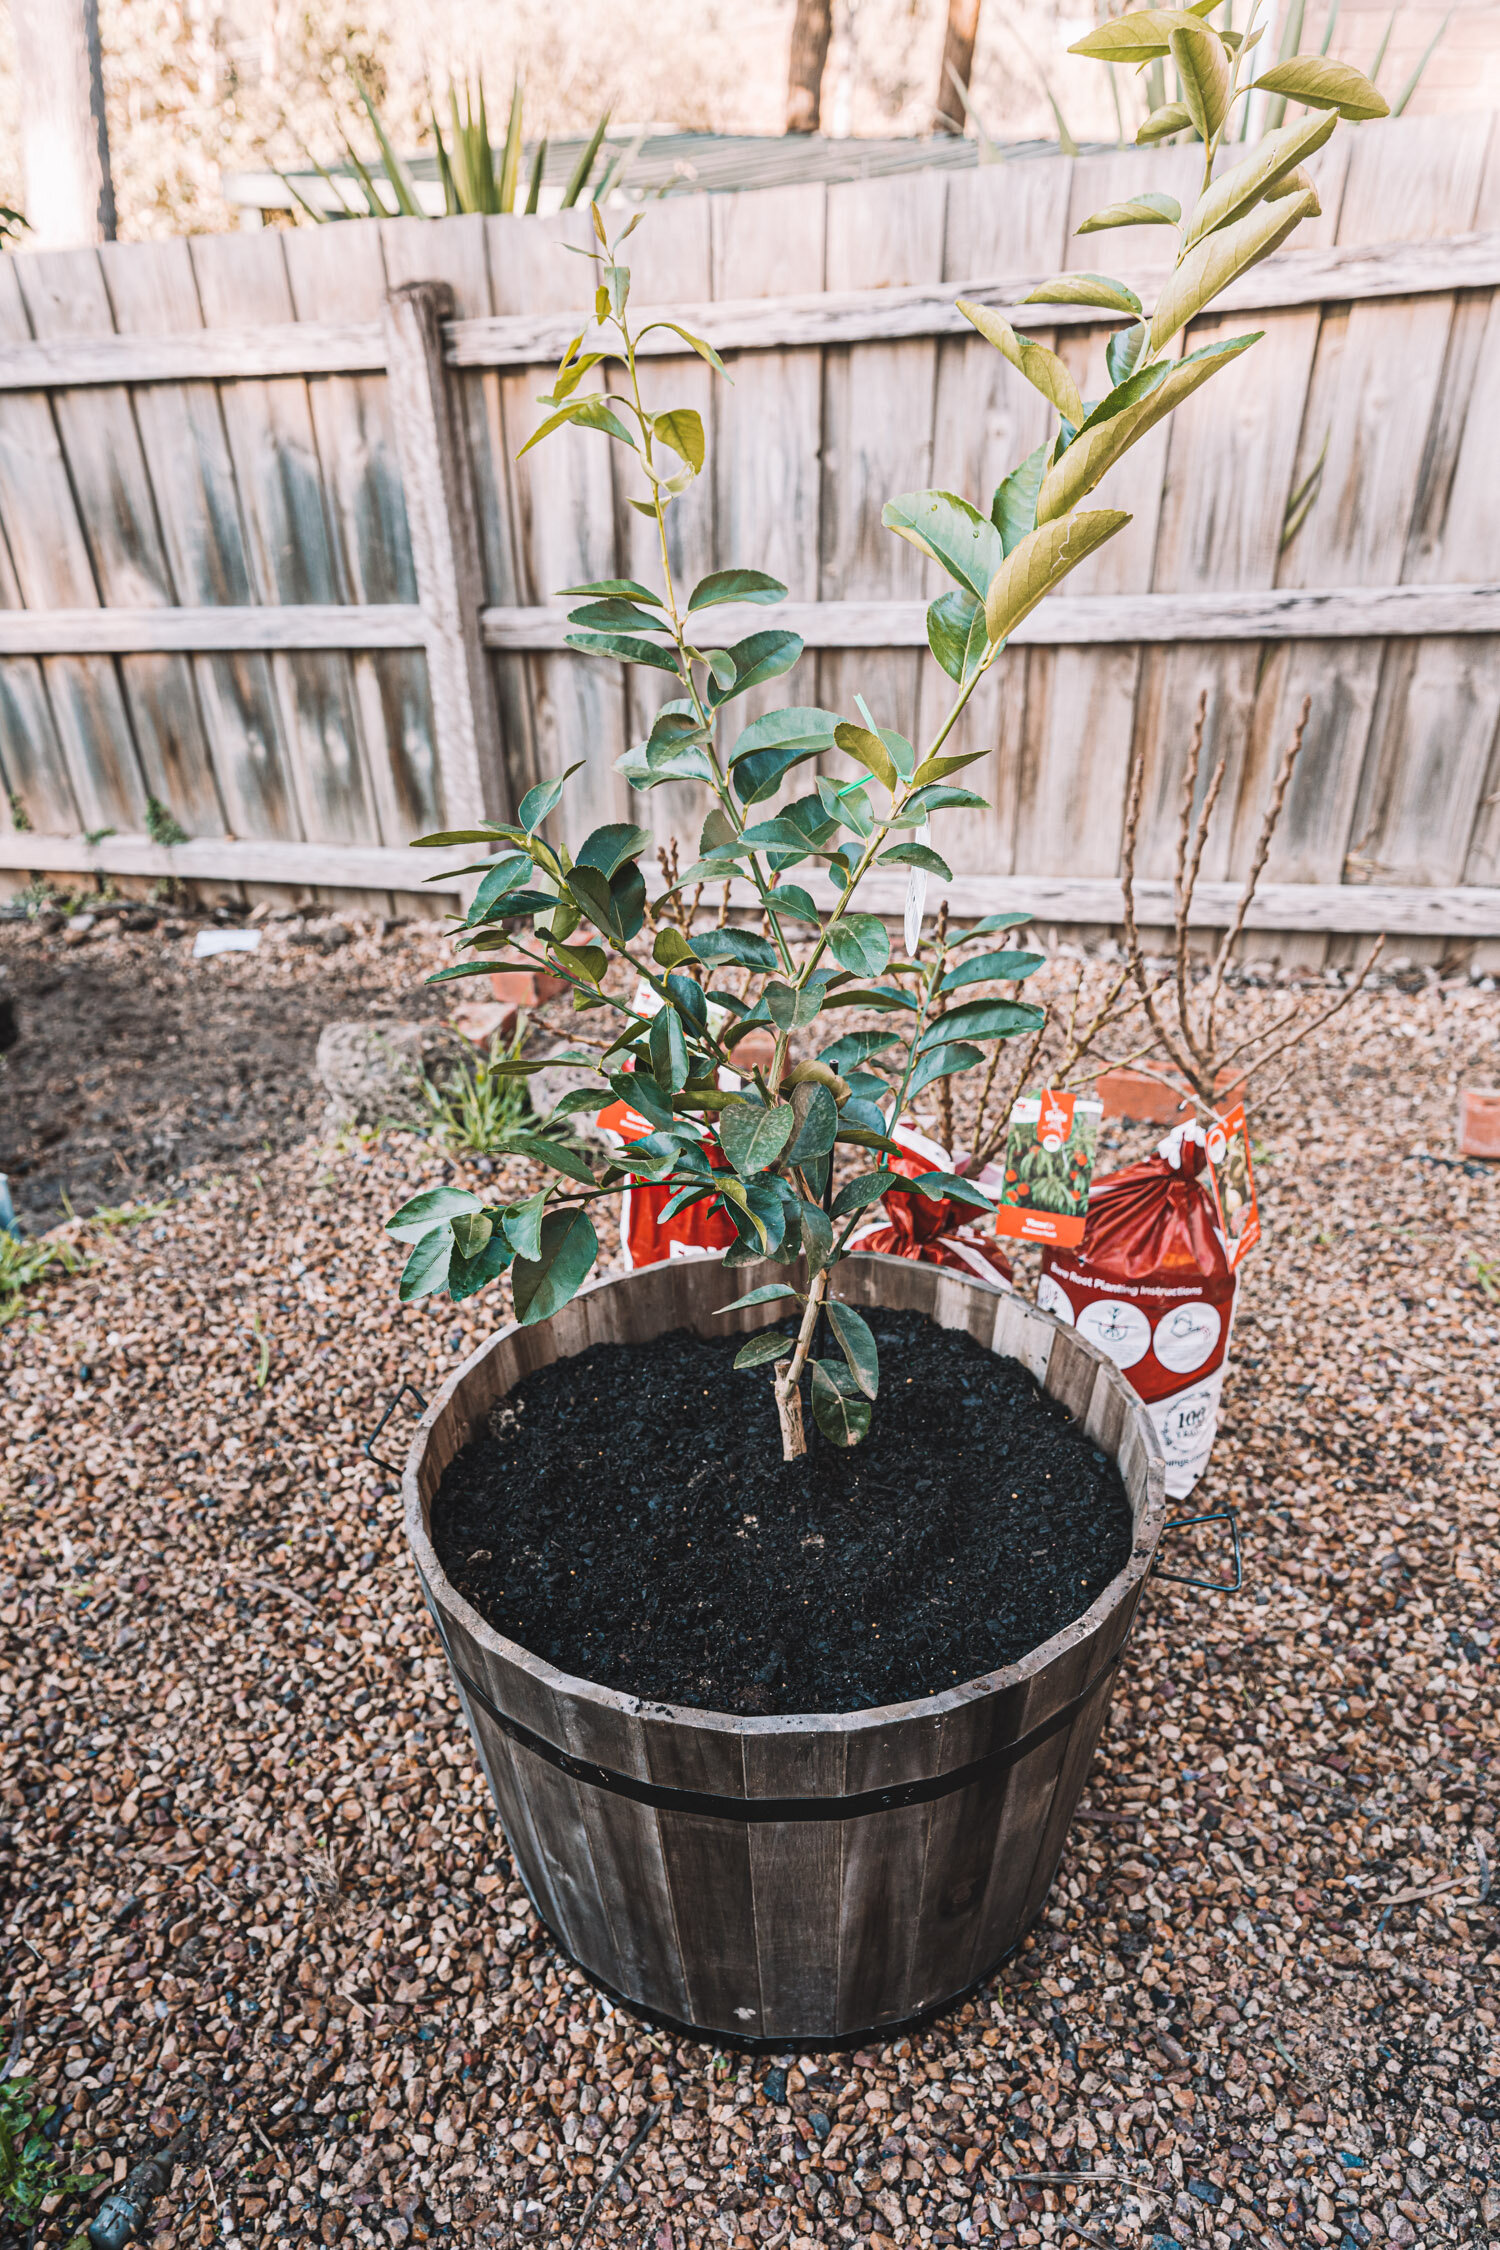 How to grow fruit trees in containers pots-23.jpg